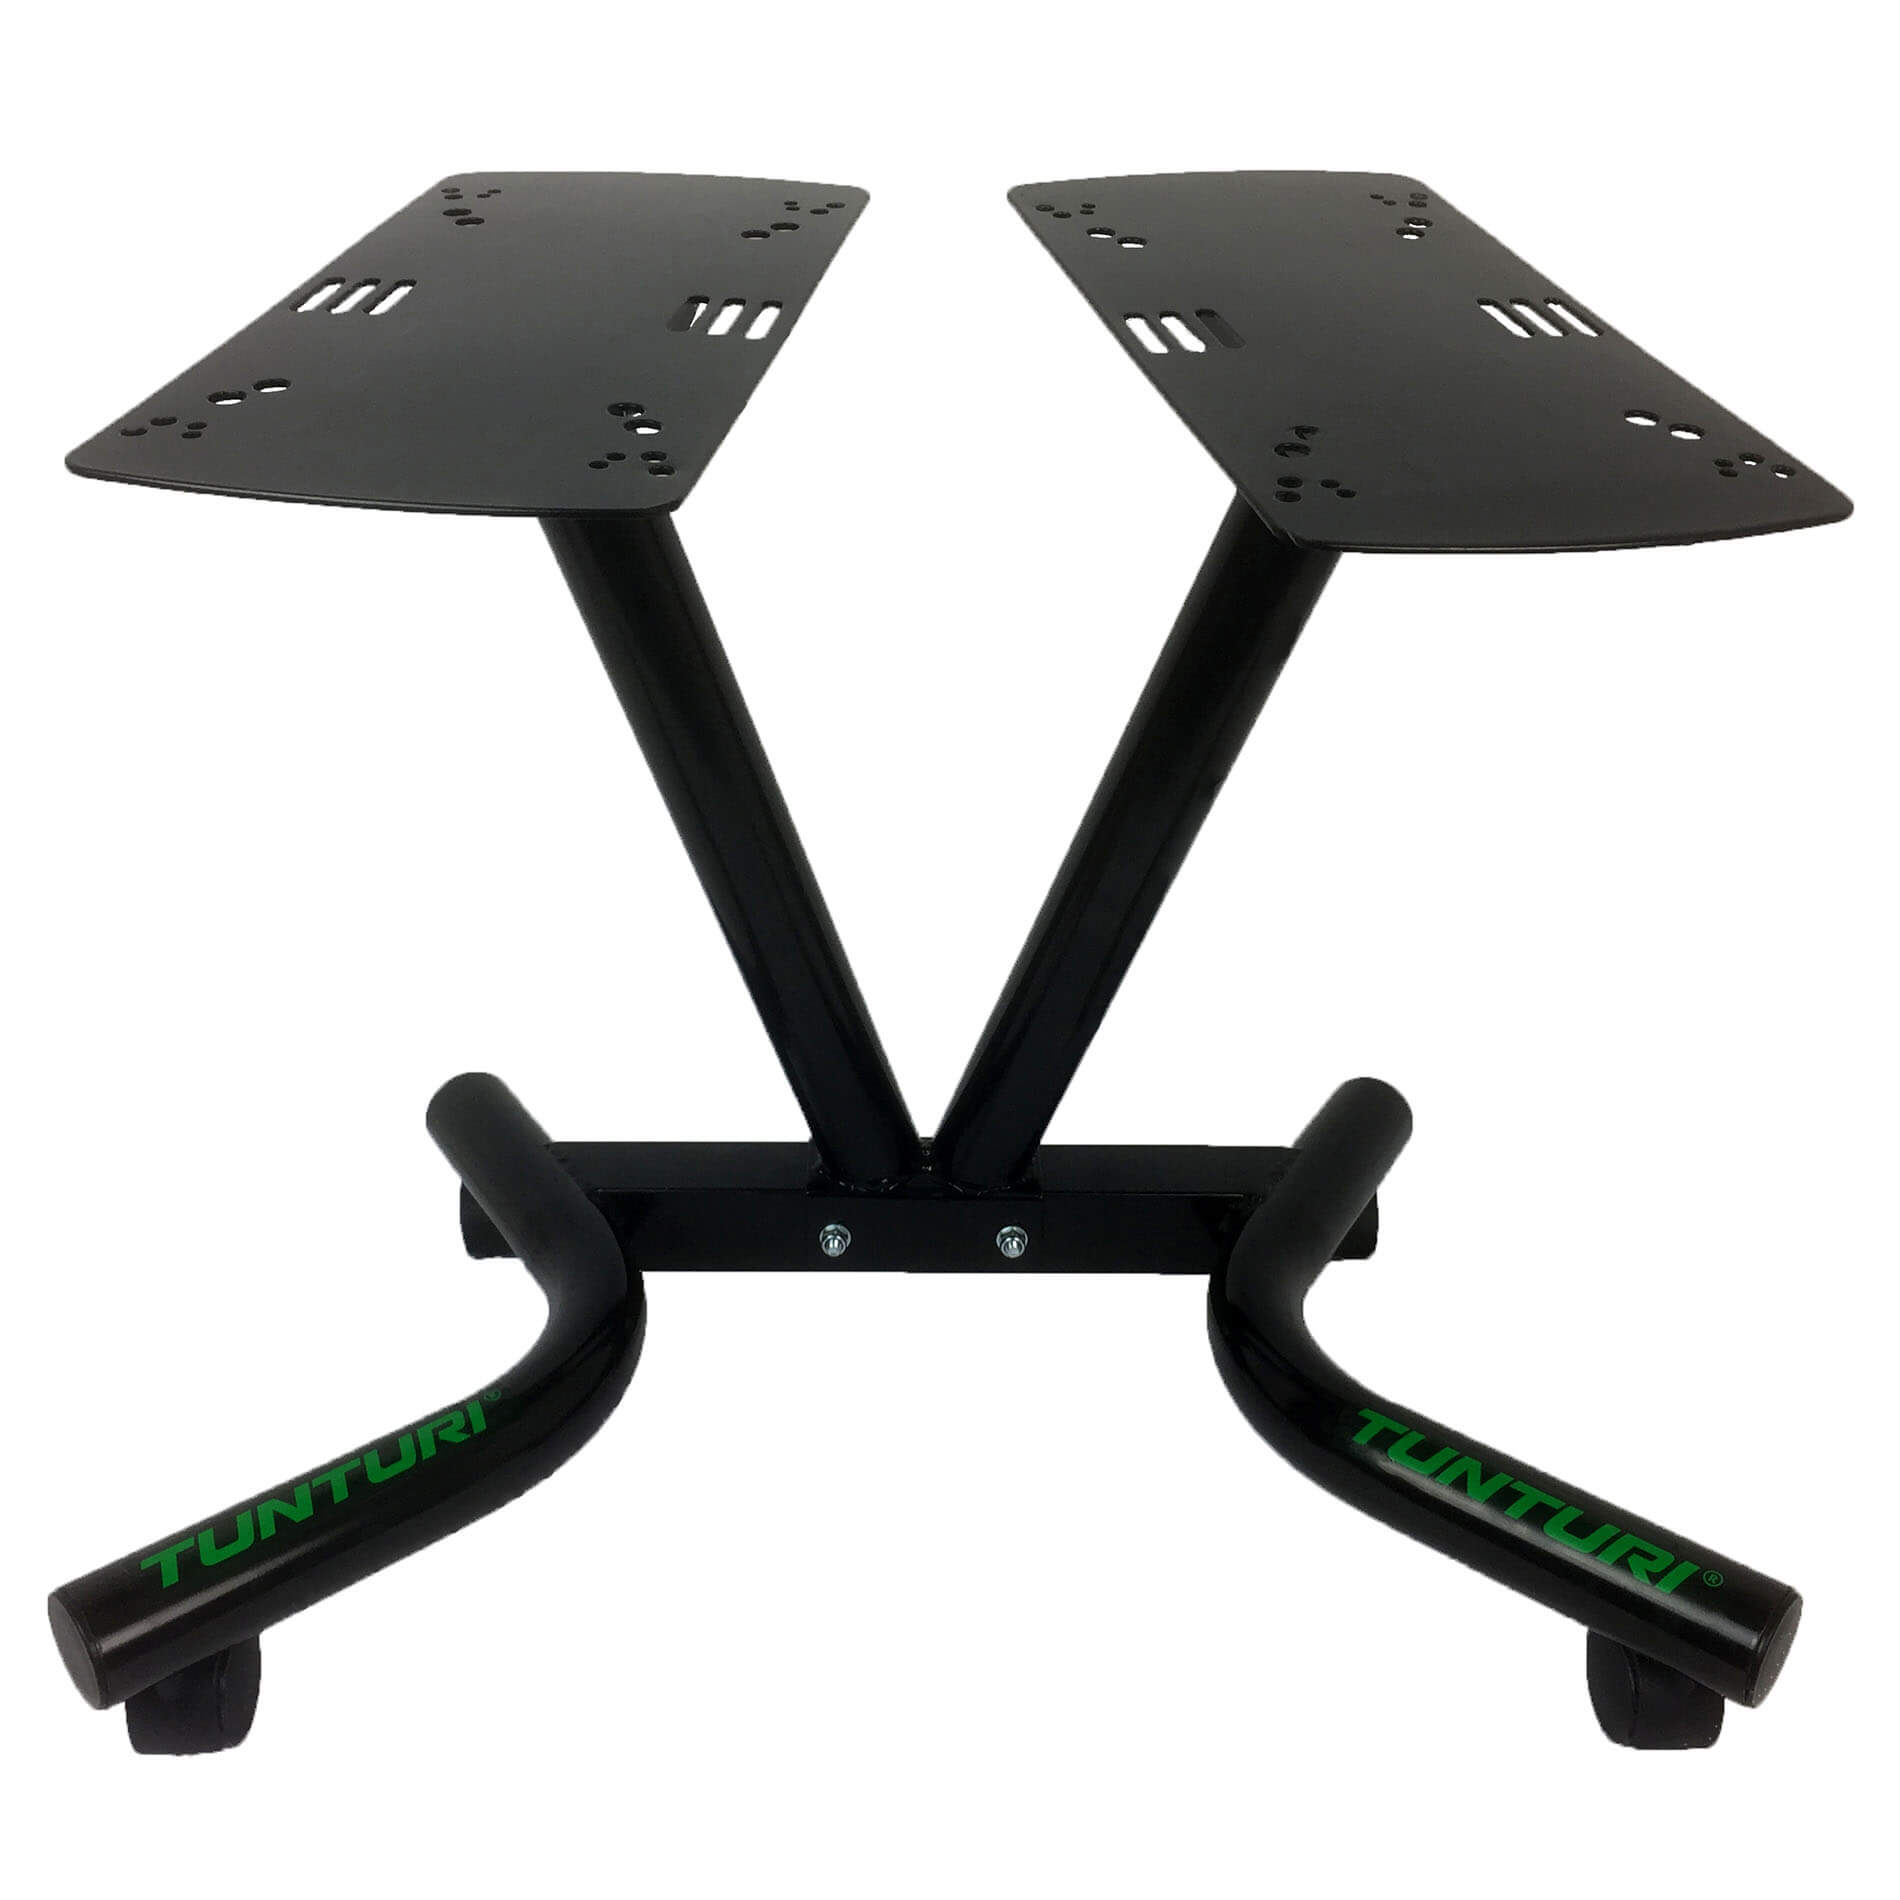 Selector Dumbbell Stand